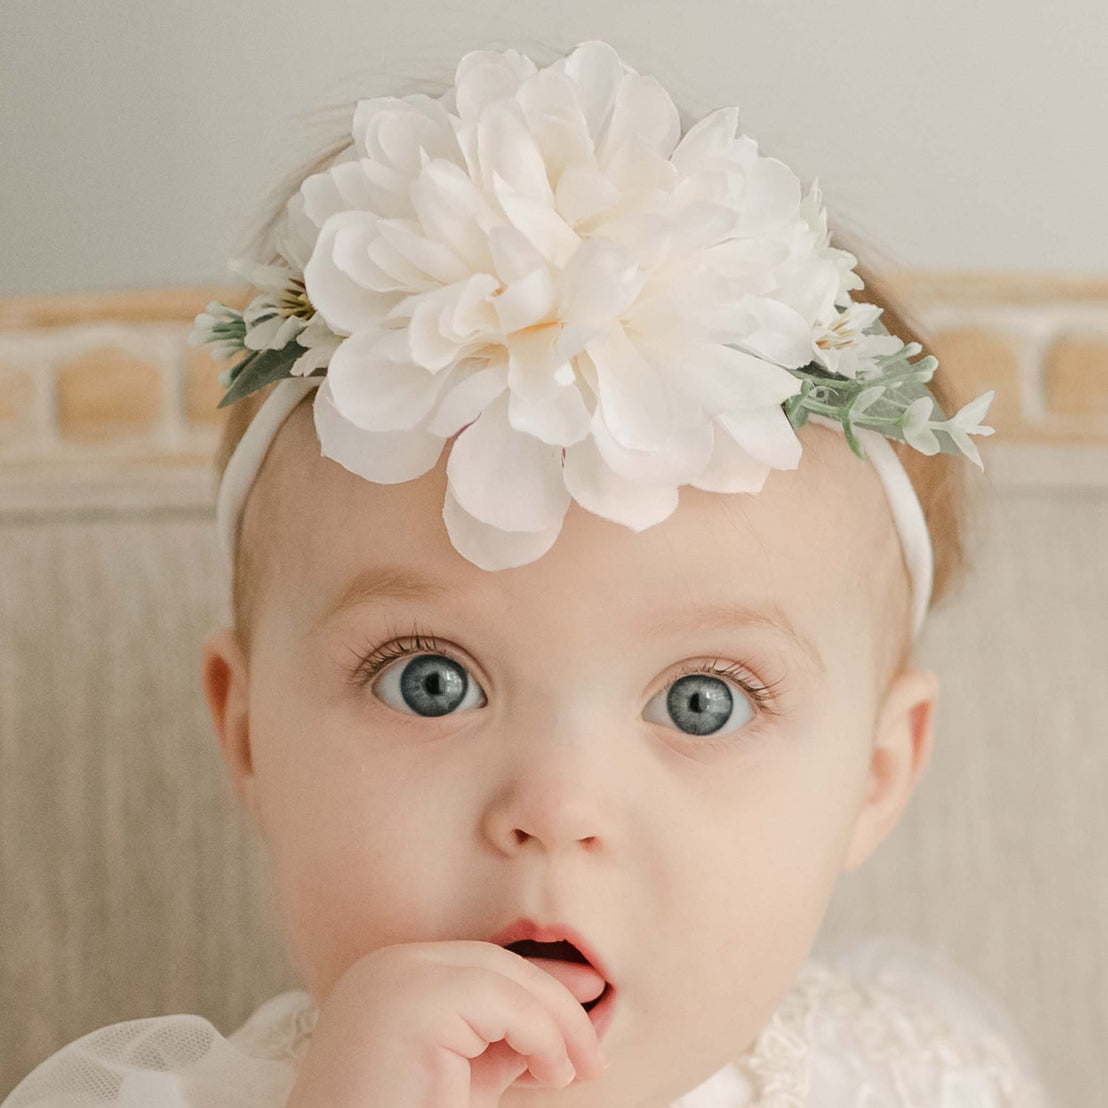 A baby with striking blue eyes looks in surprise or curiosity during her christening, adorned with a large white Kristina Flower Headband.